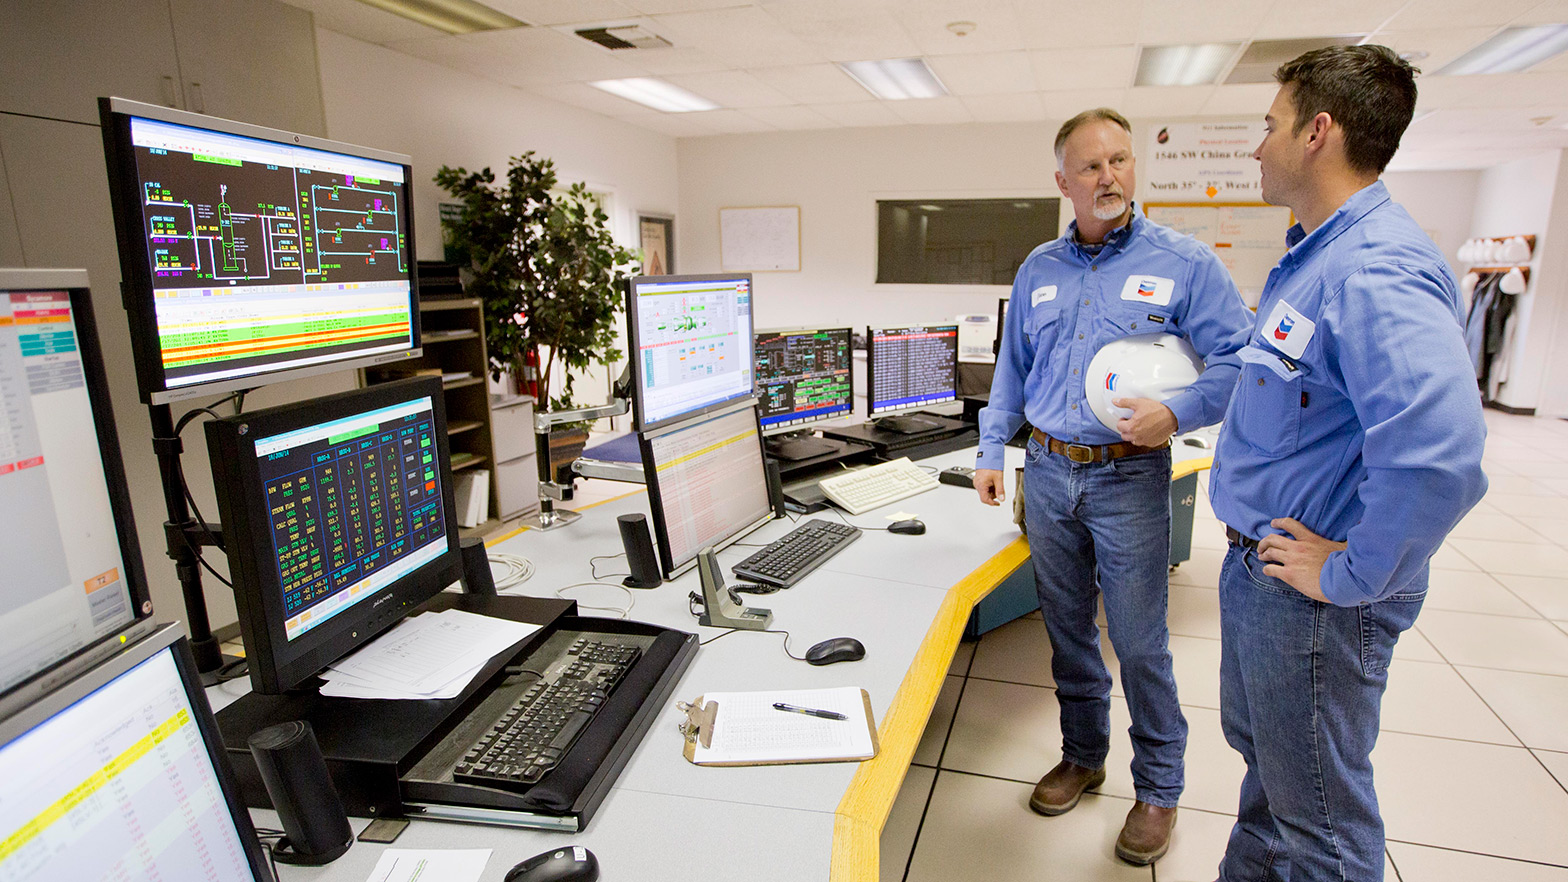 Workers in the control room at the Sycamore Cogeneration plant at Kern River Field in Bakersfield, California.